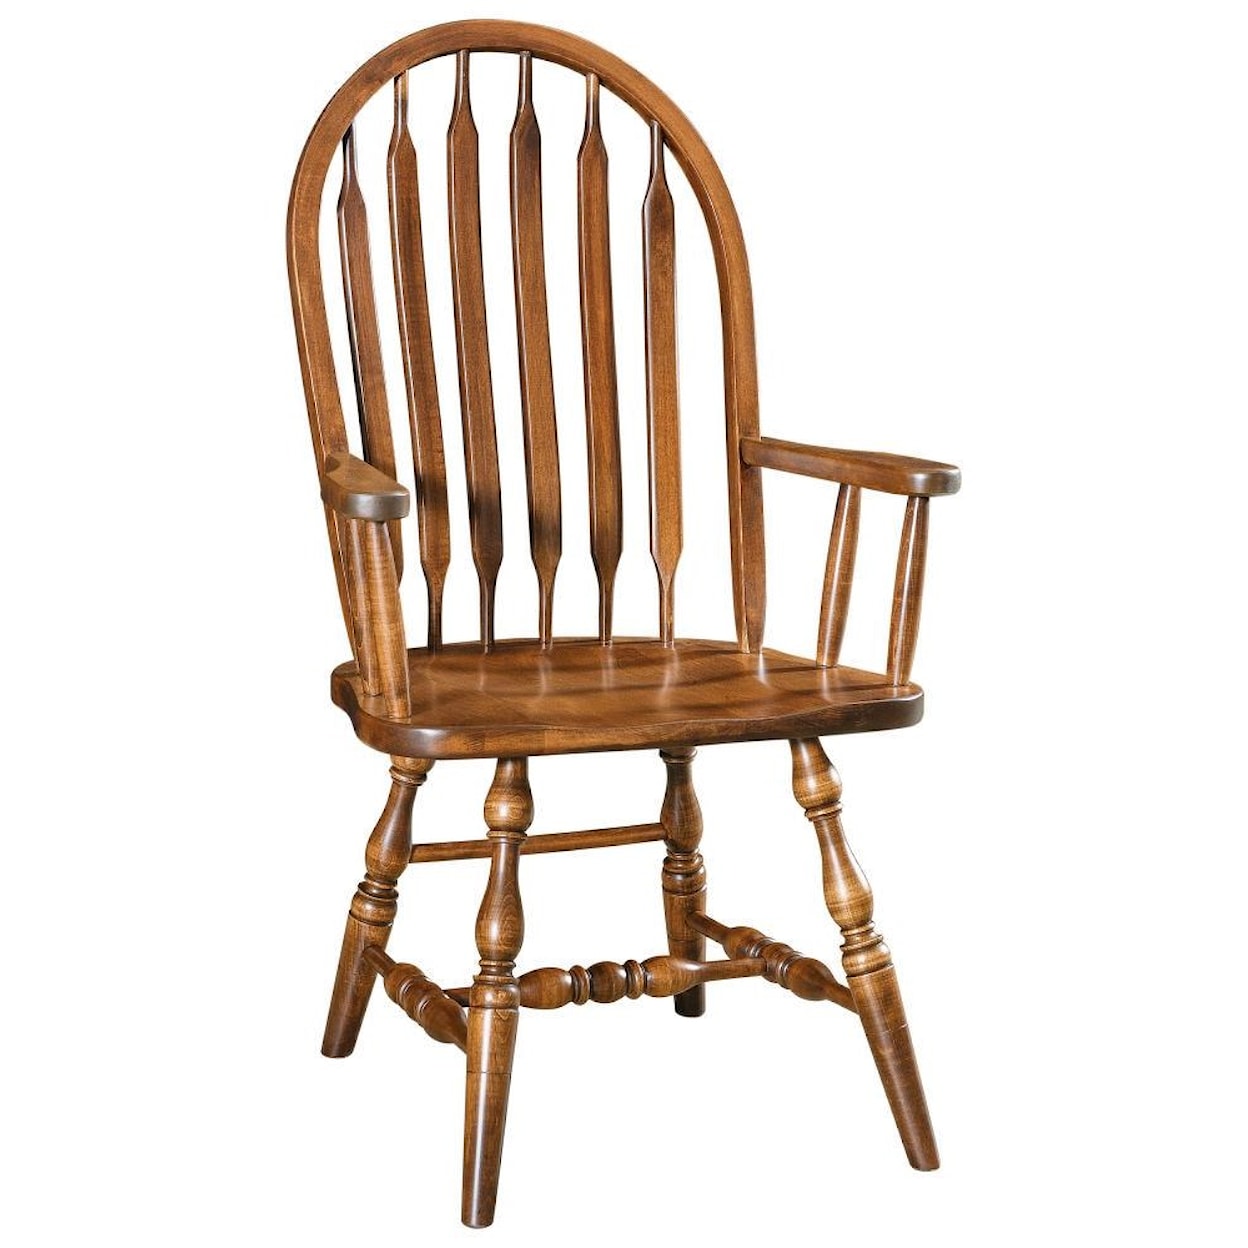 F&N Woodworking Bent Paddle Arm Chair